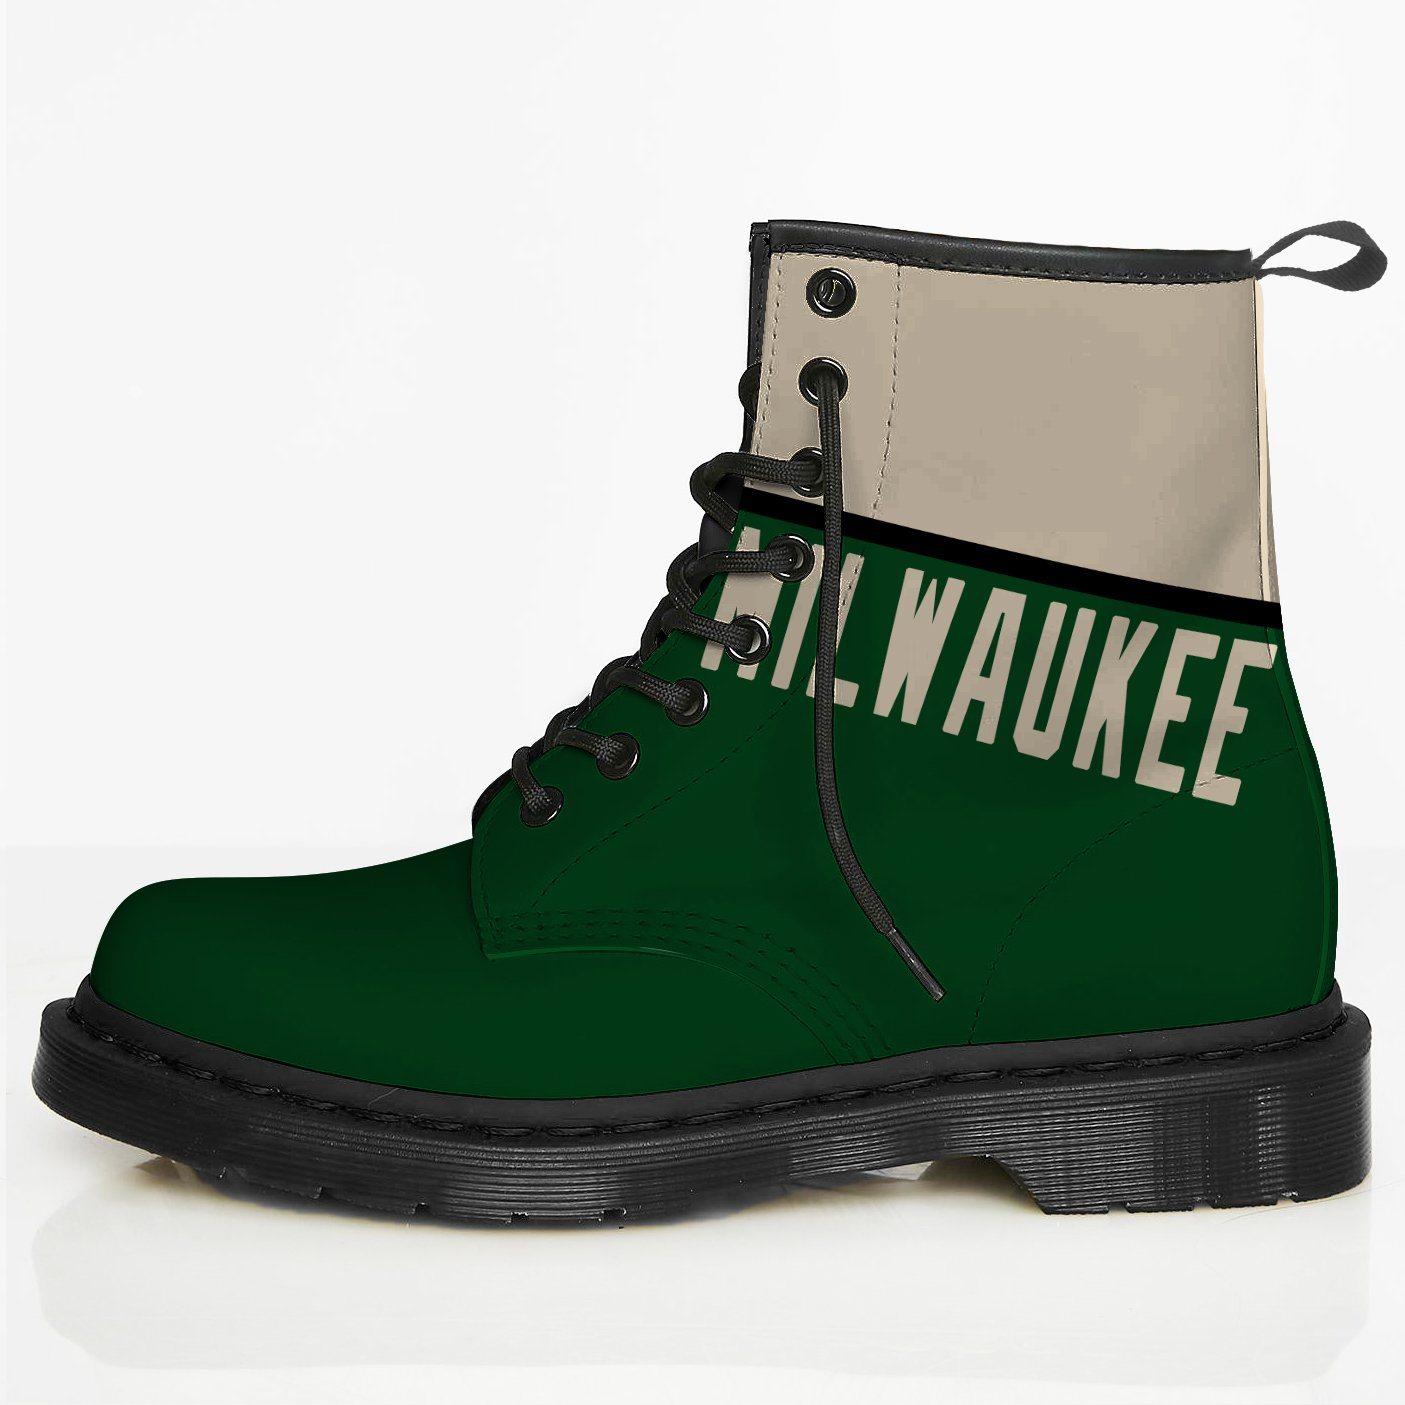 Milwaukee Custom Leather Boots For Fans – Let the colors inspire you!